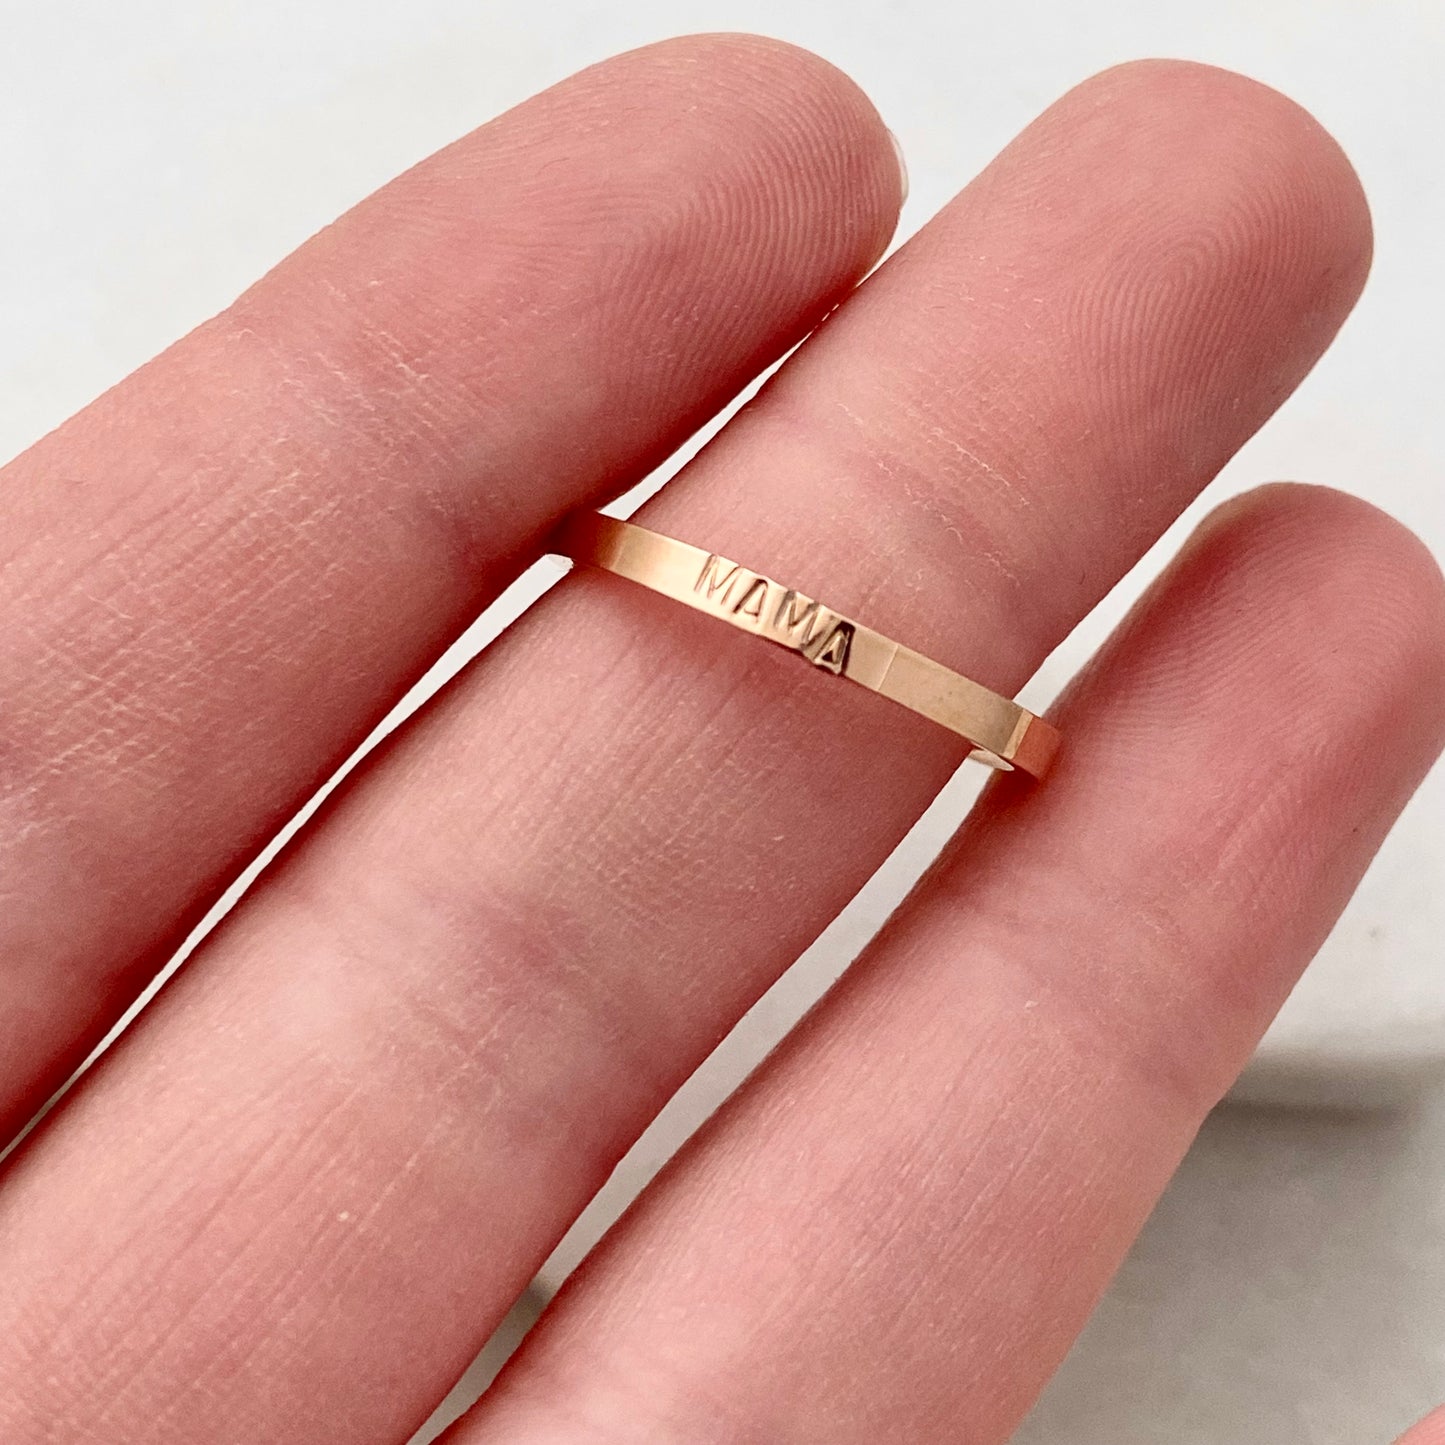 Mama, Size 7, Rose Gold Mini Stacking Ring, Stainless Steel Jewelry, Minimalist Rings, Waterproof Jewelry, Dainty Ring, Stacking Ring Set Rings callistafaye   